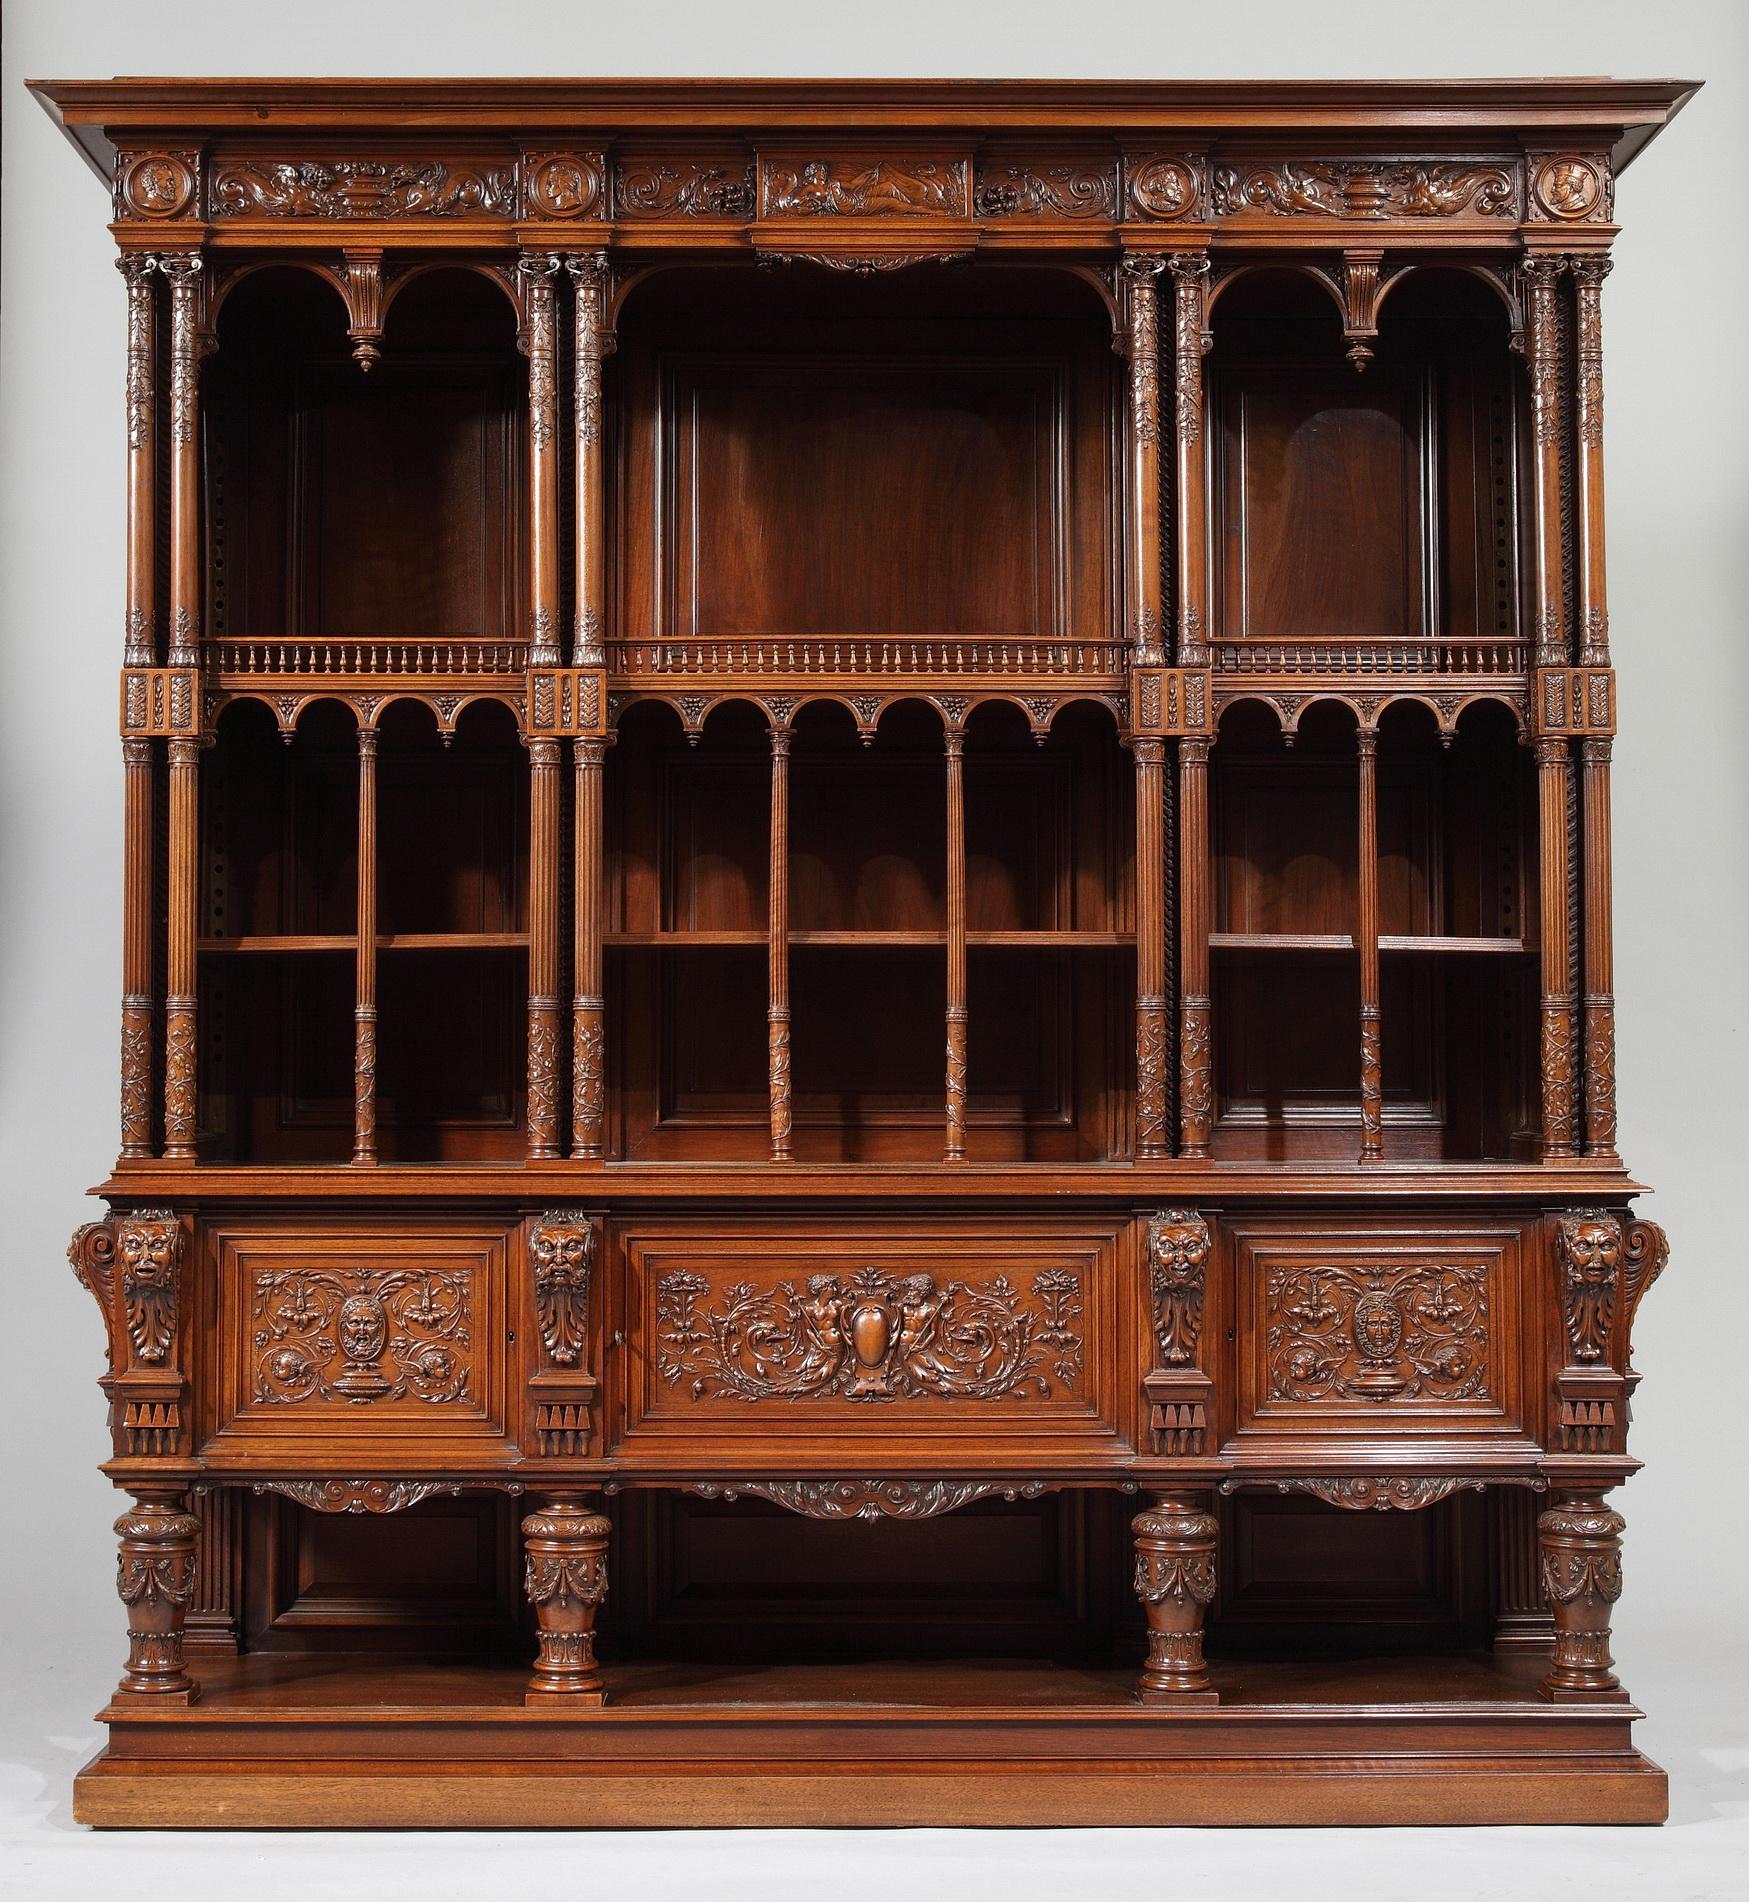 An outstanding carved cabinet in the Renaissance style. The upper part consists in two stages with arcades, divided in six compartments by rich columns with Corinthian capitals, and topped by a carved entablature. The lower part opens with three